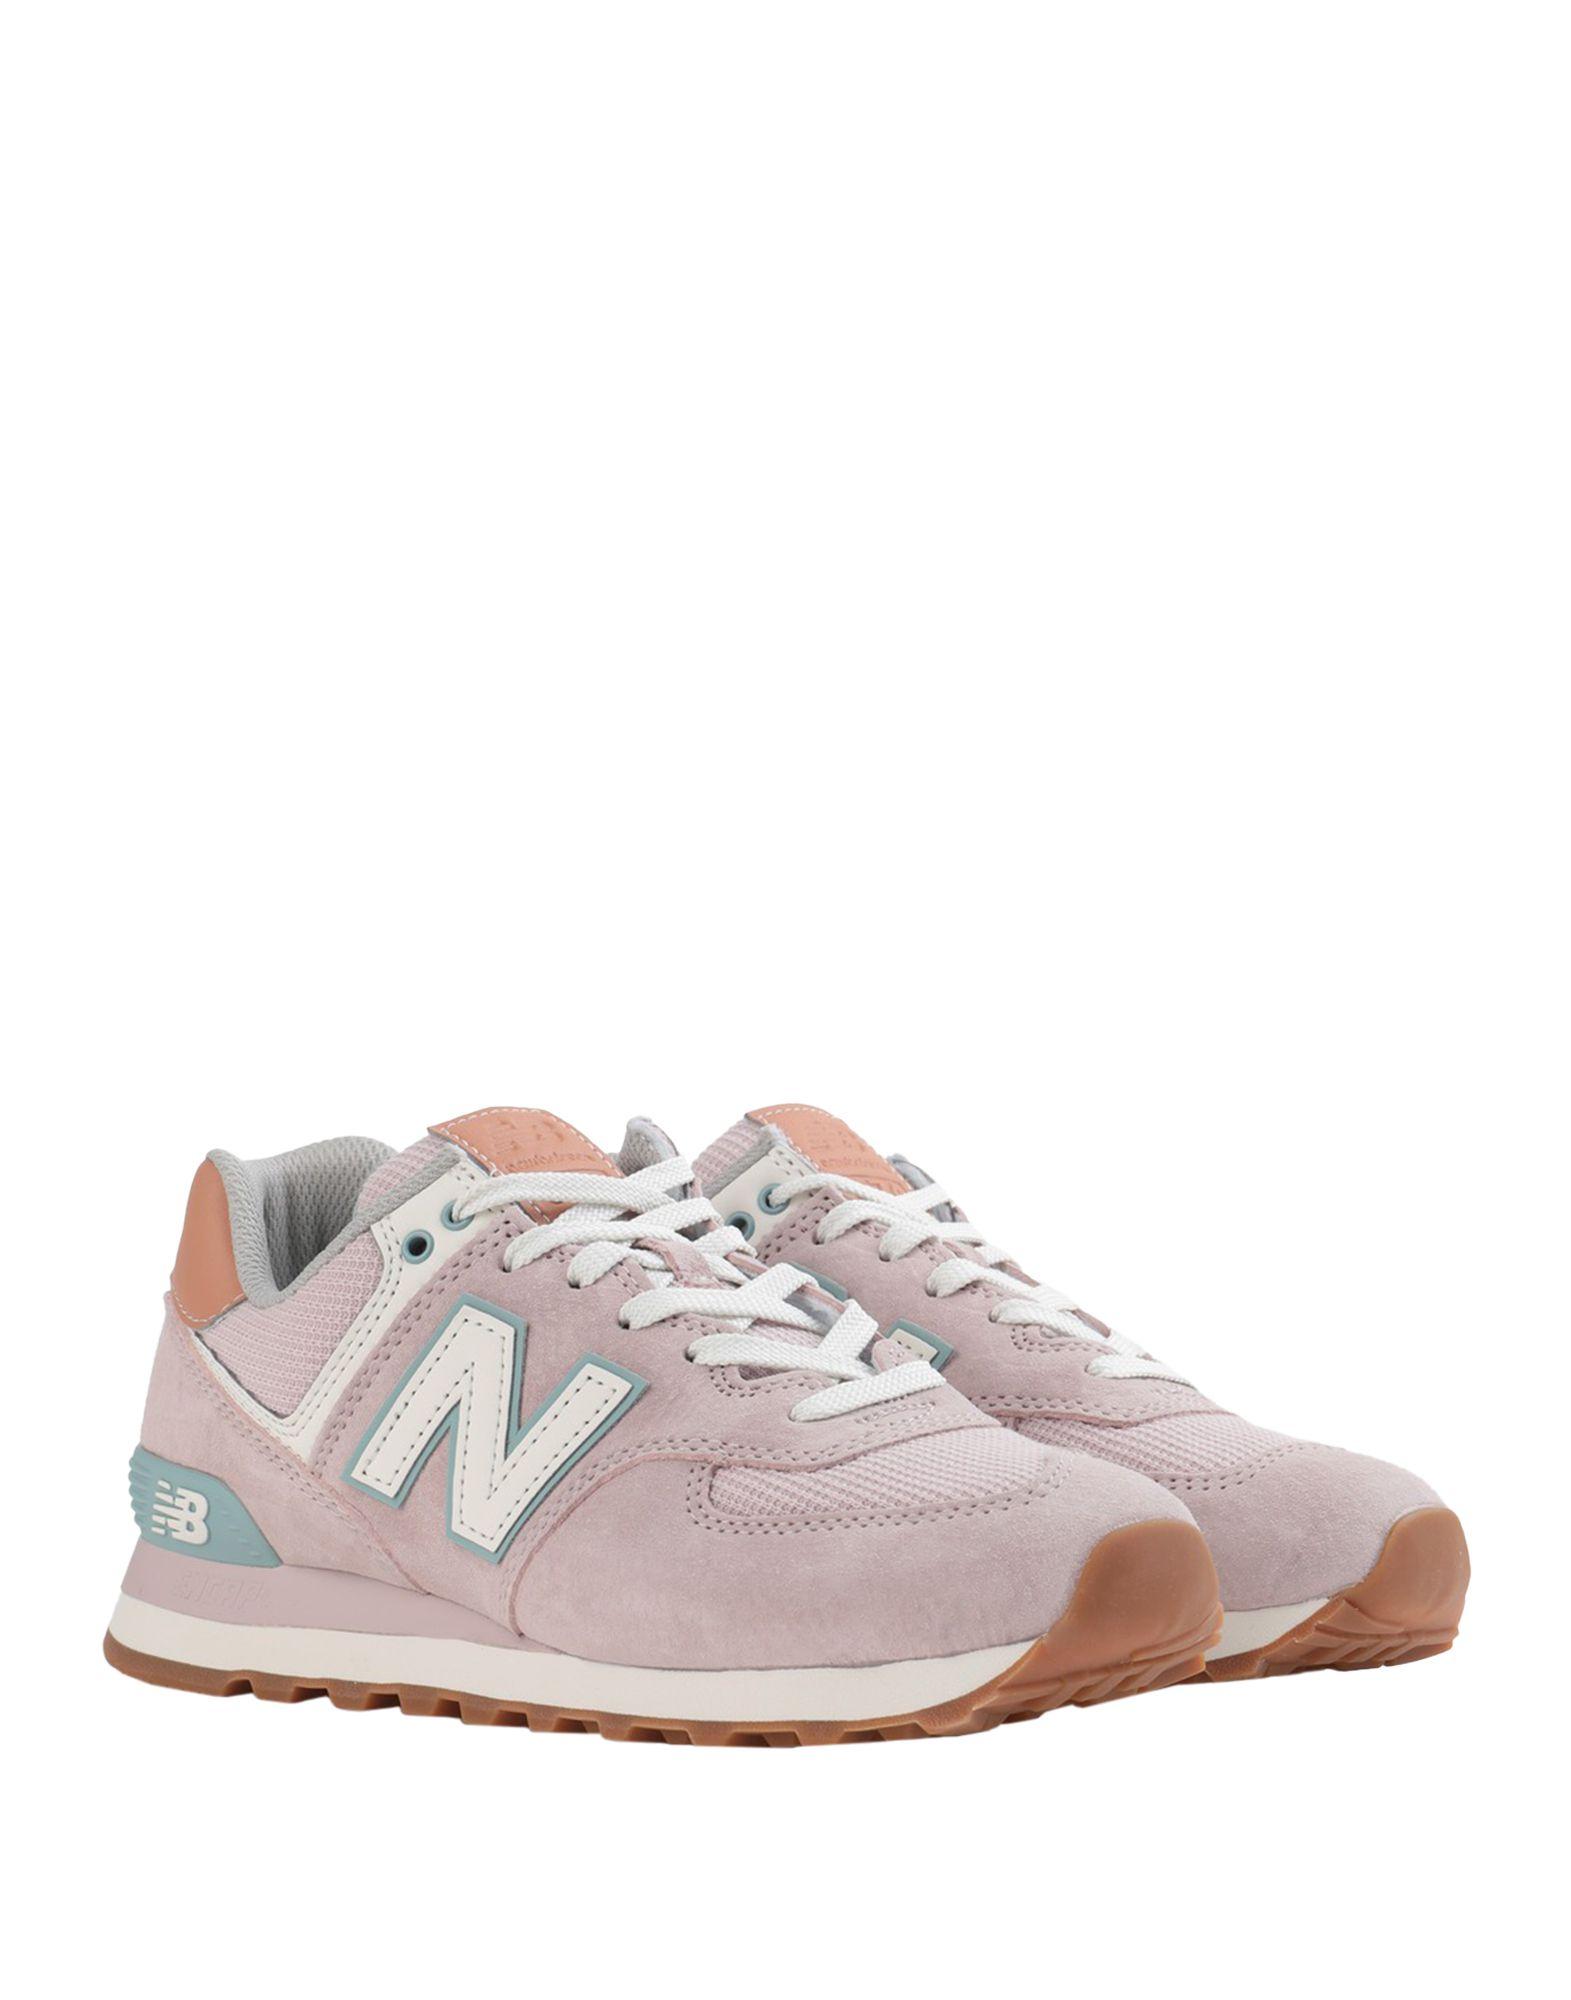 New Balance Suede Low-tops & Sneakers in Pink - Lyst